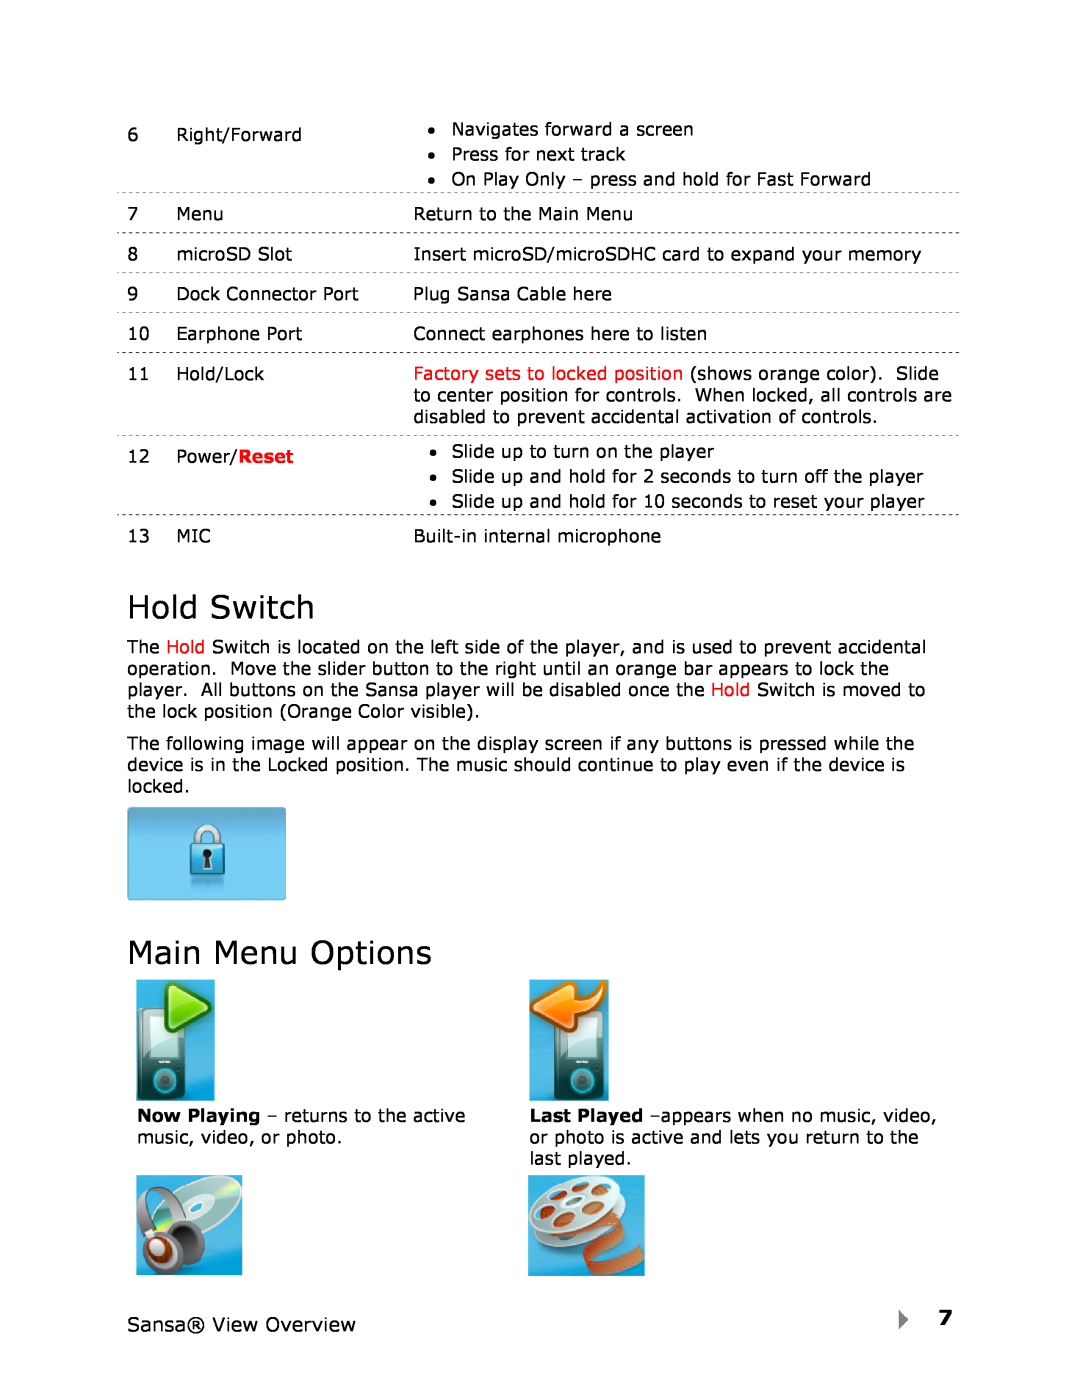 SanDisk View user manual Hold Switch, Main Menu Options 